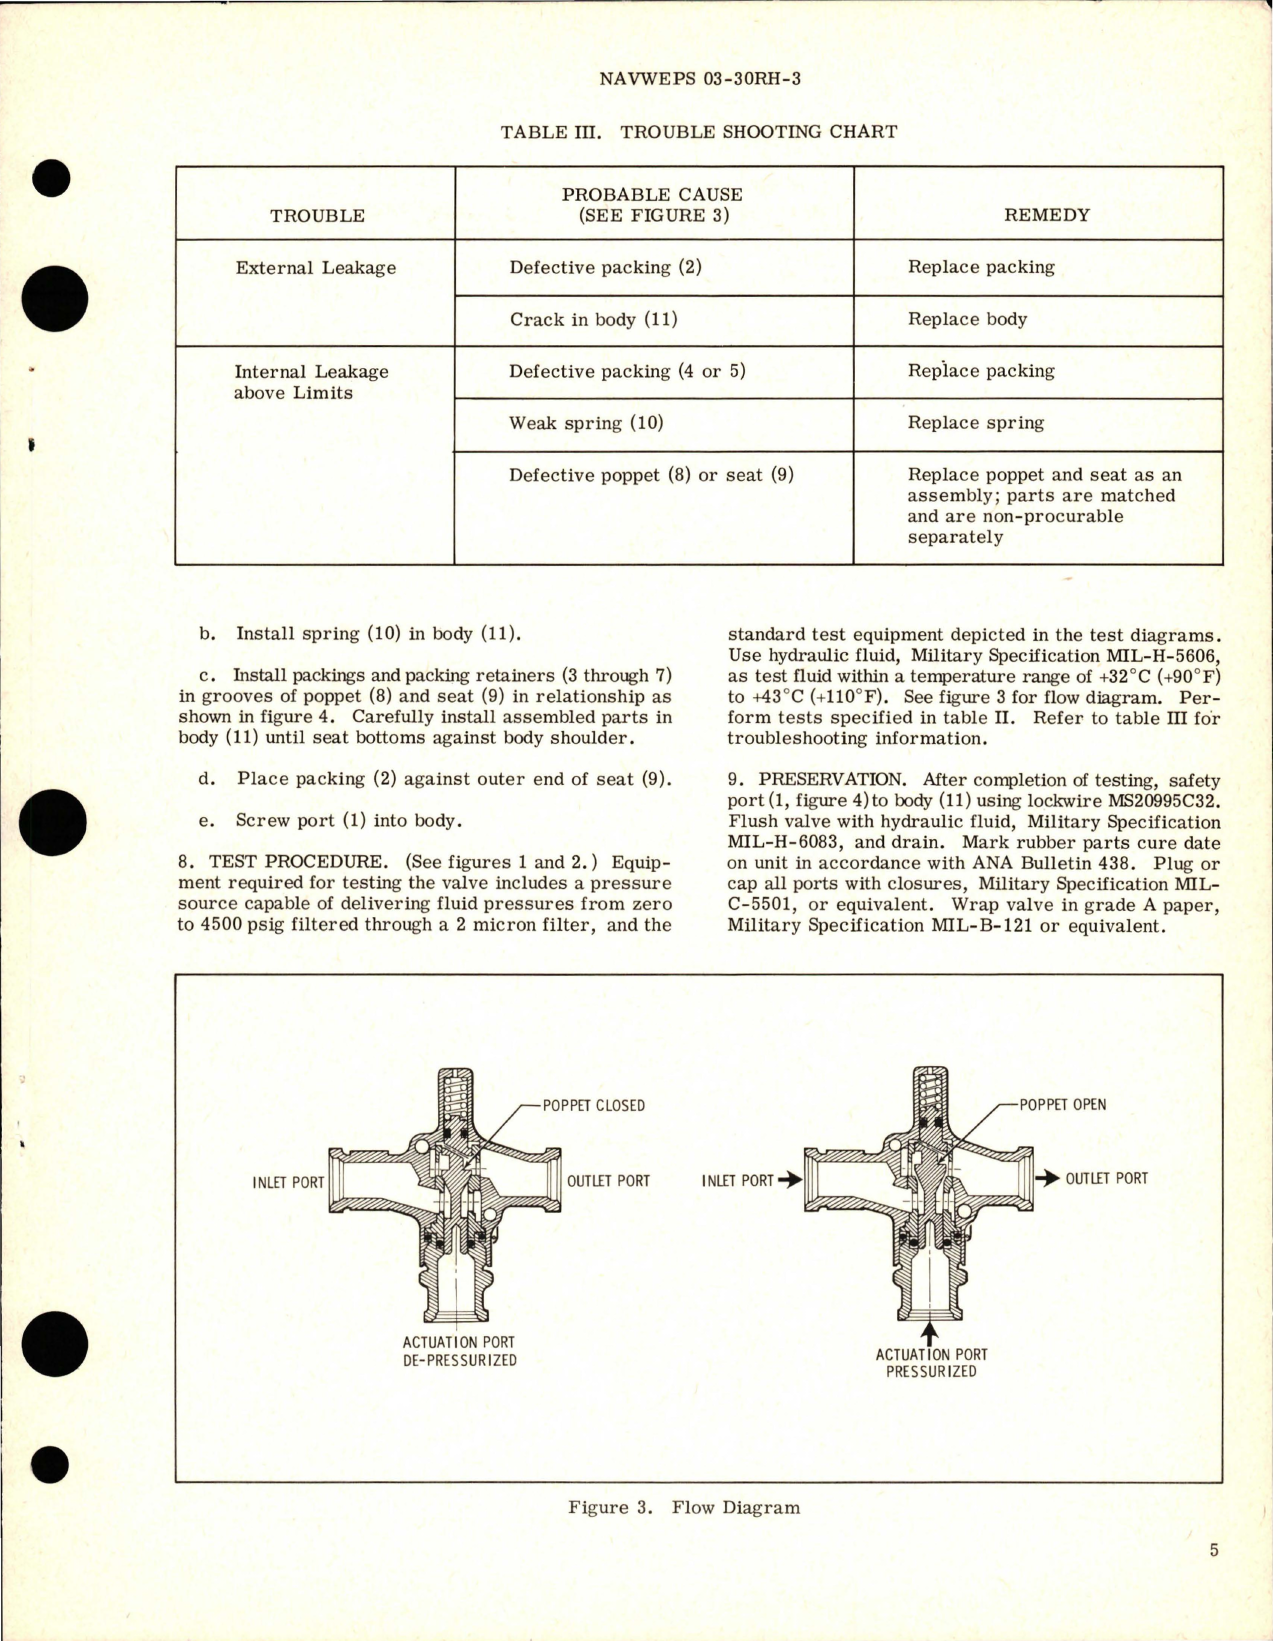 Sample page 5 from AirCorps Library document: Overhaul Instructions with Parts Breakdown for Pressure Operated Shutoff Valve - Part 7-U-7105 